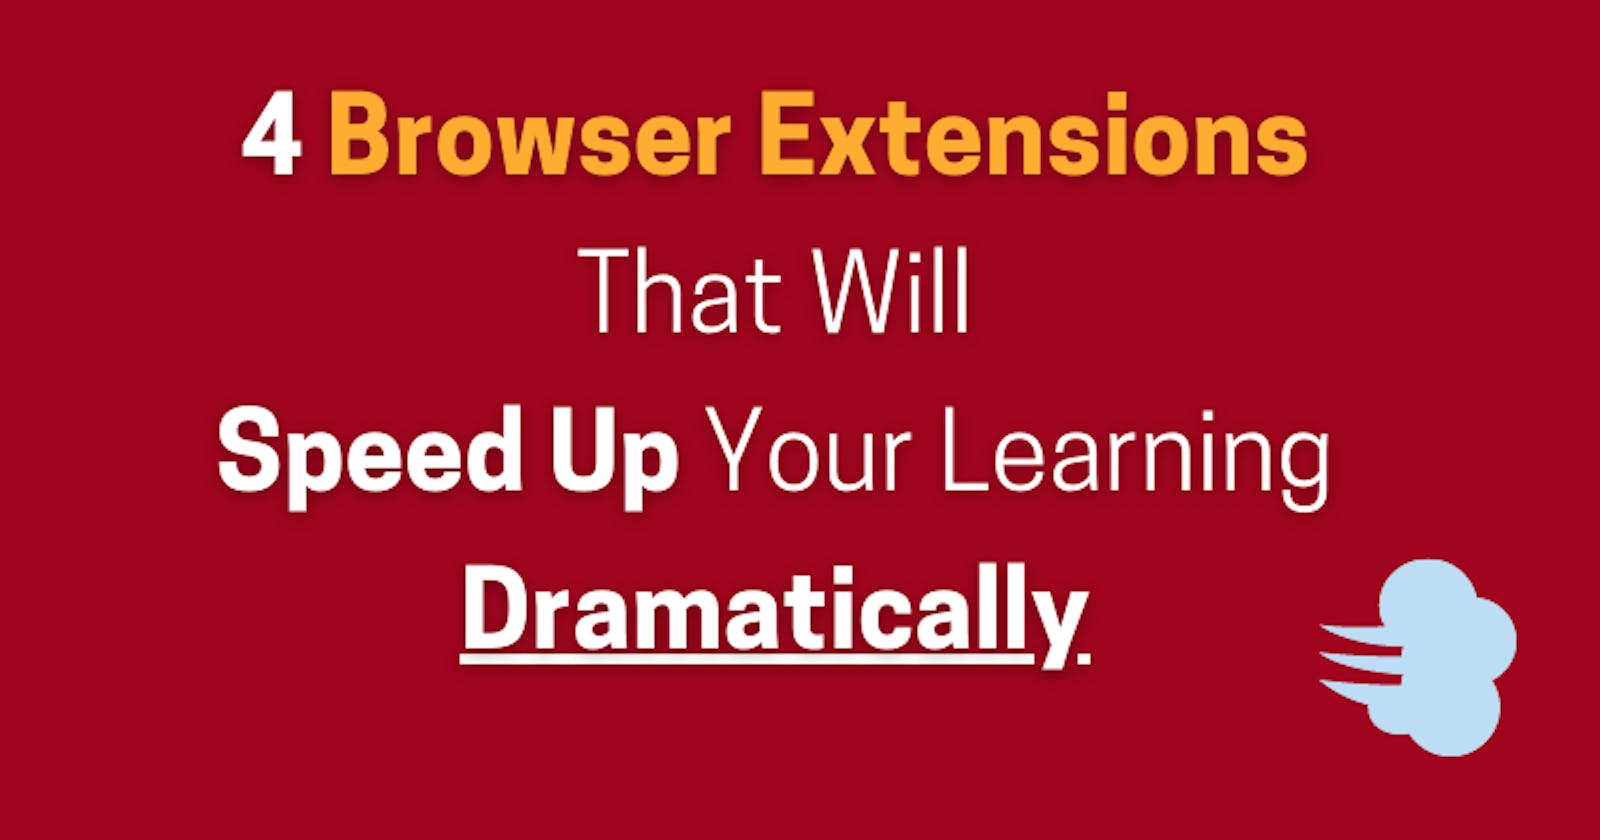 4 Browser Extensions That Will Speed Up Your Learning Dramatically